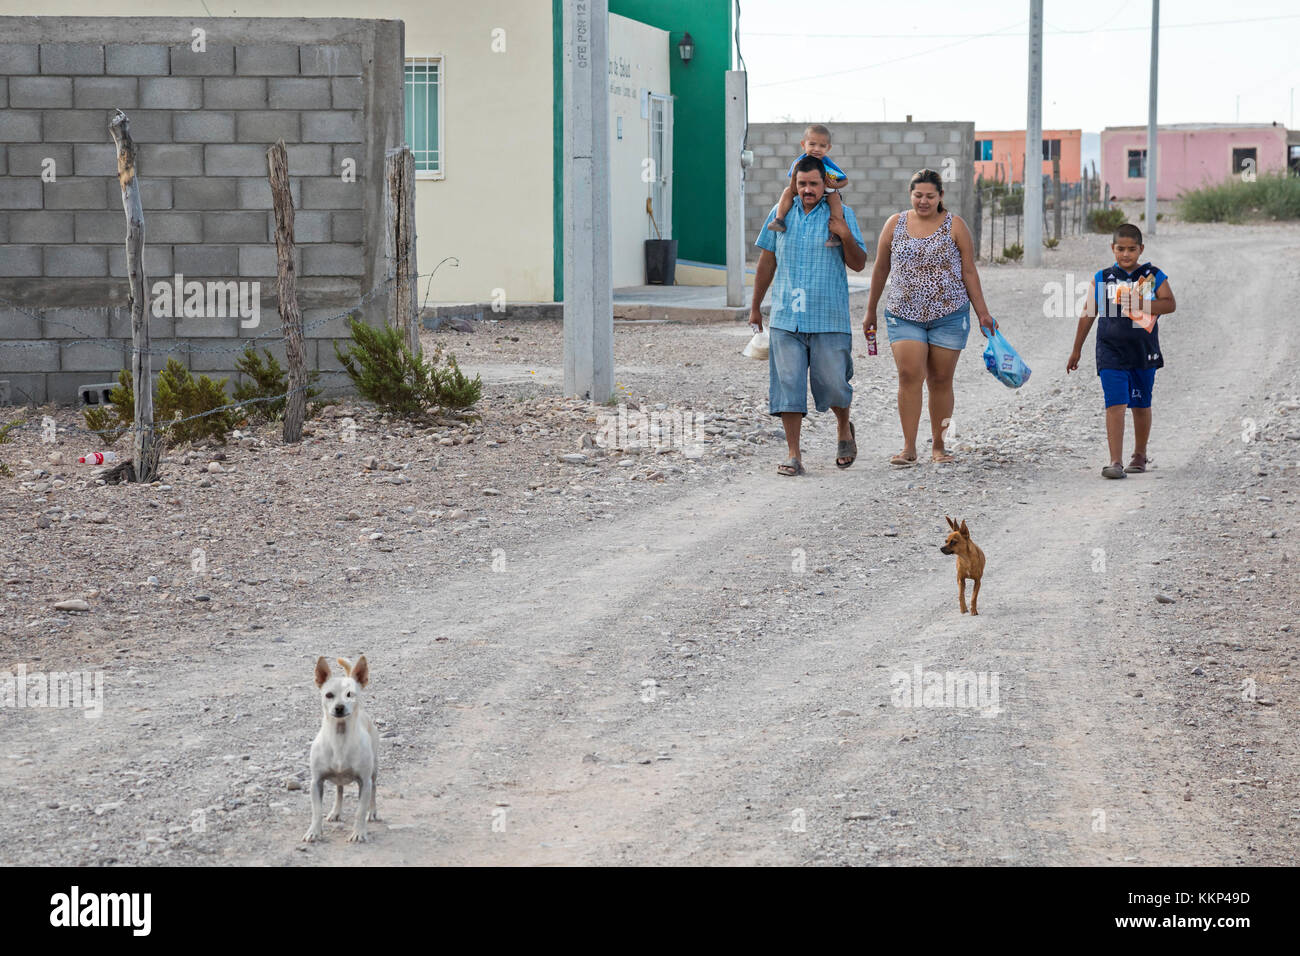 Boquillas del Carmen, Coahuila, Mexico - A family walks on a dusty street in the small border town of Boquillas. The town is popular with tourists who Stock Photo